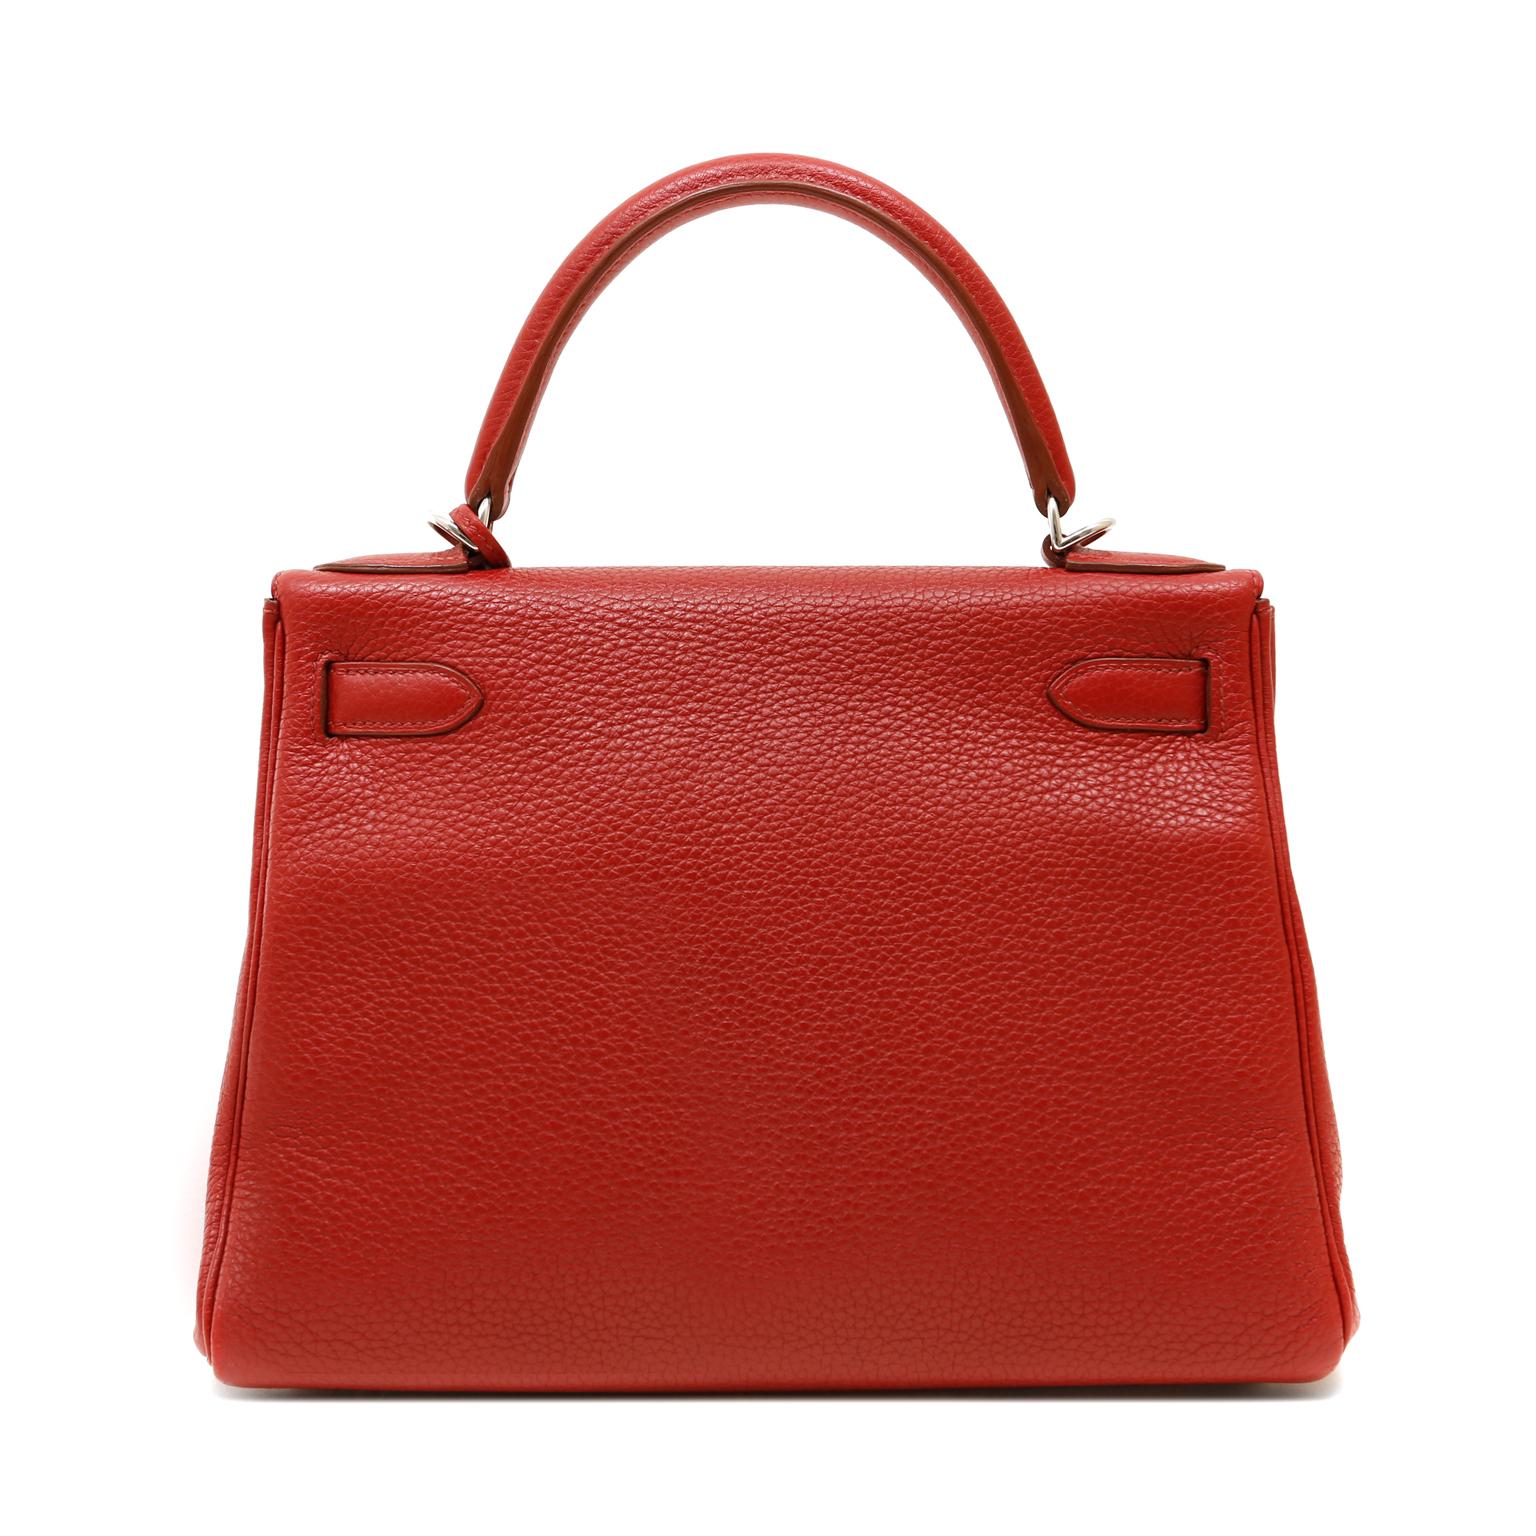 This authentic Hermès Garnet Red Togo Leather 28 cm Kelly is in excellent condition.  The ladylike Kelly is in high demand and requires extensive waiting periods from Hermès.  Deep lipstick red paired with Palladium hardware is a stunning and